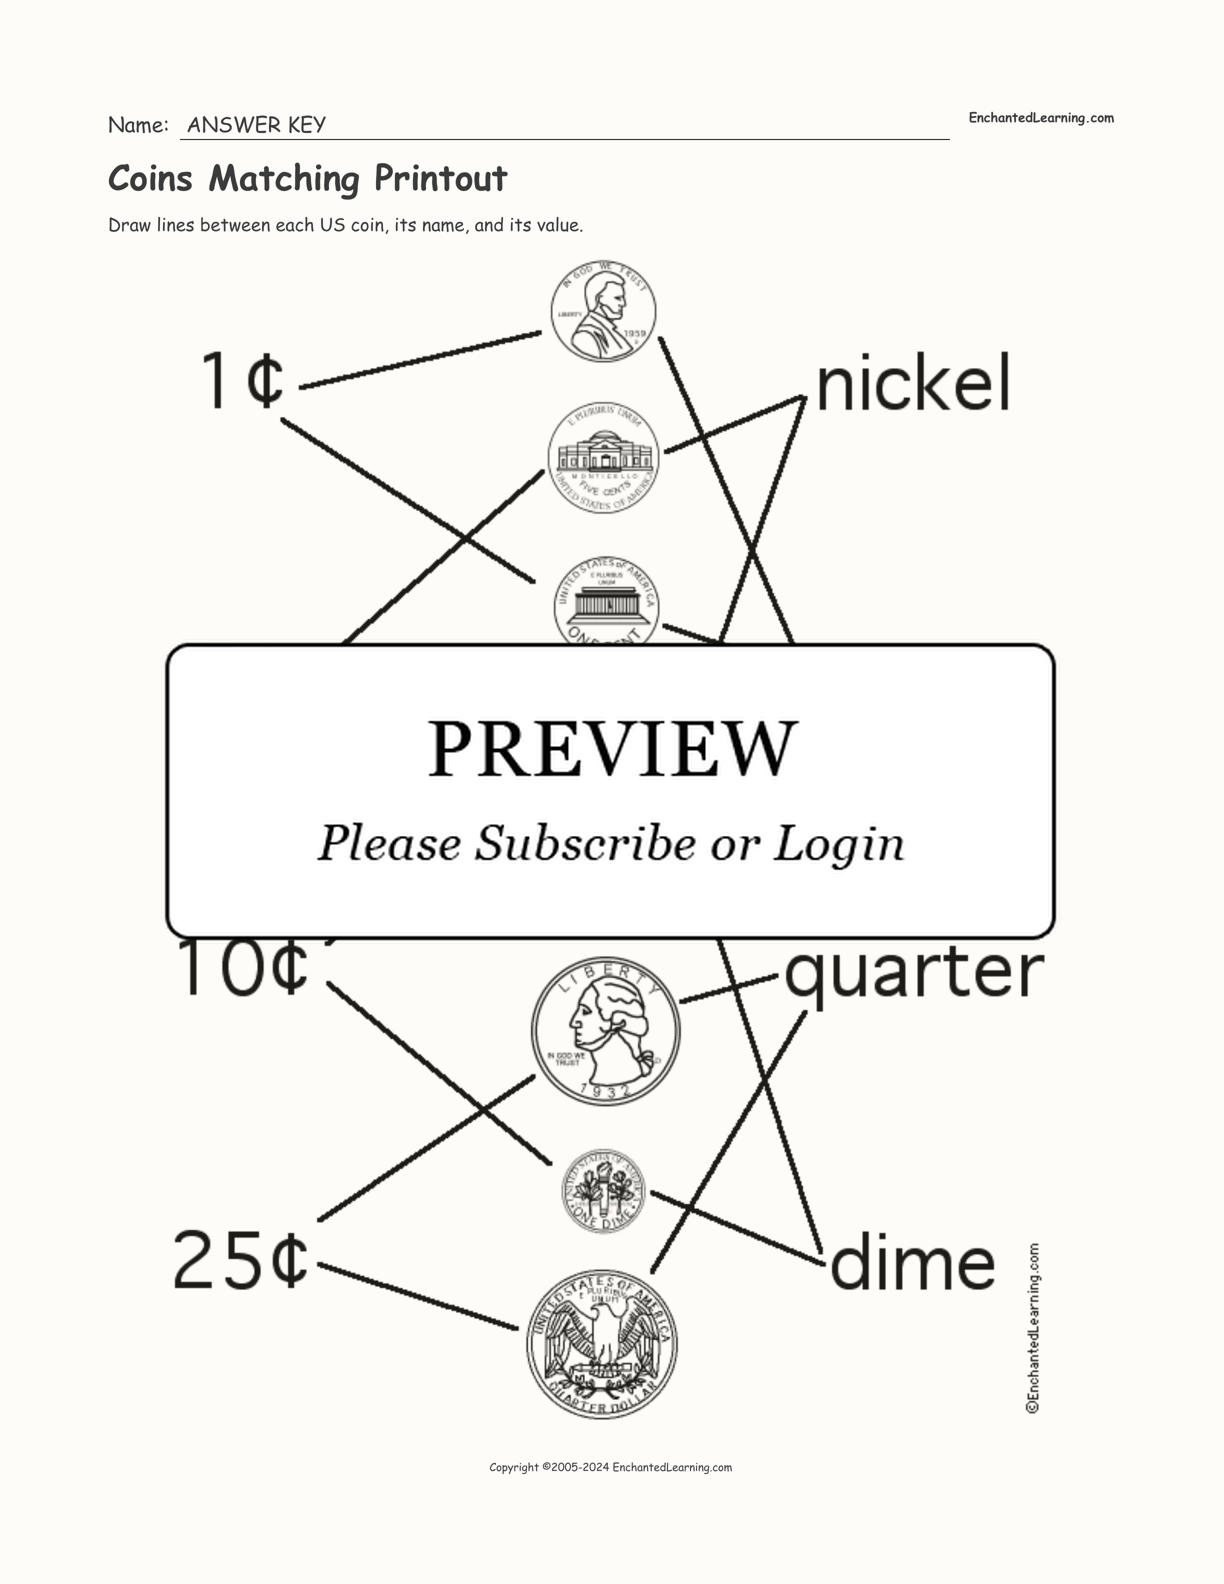 Coins Matching Printout interactive worksheet page 2